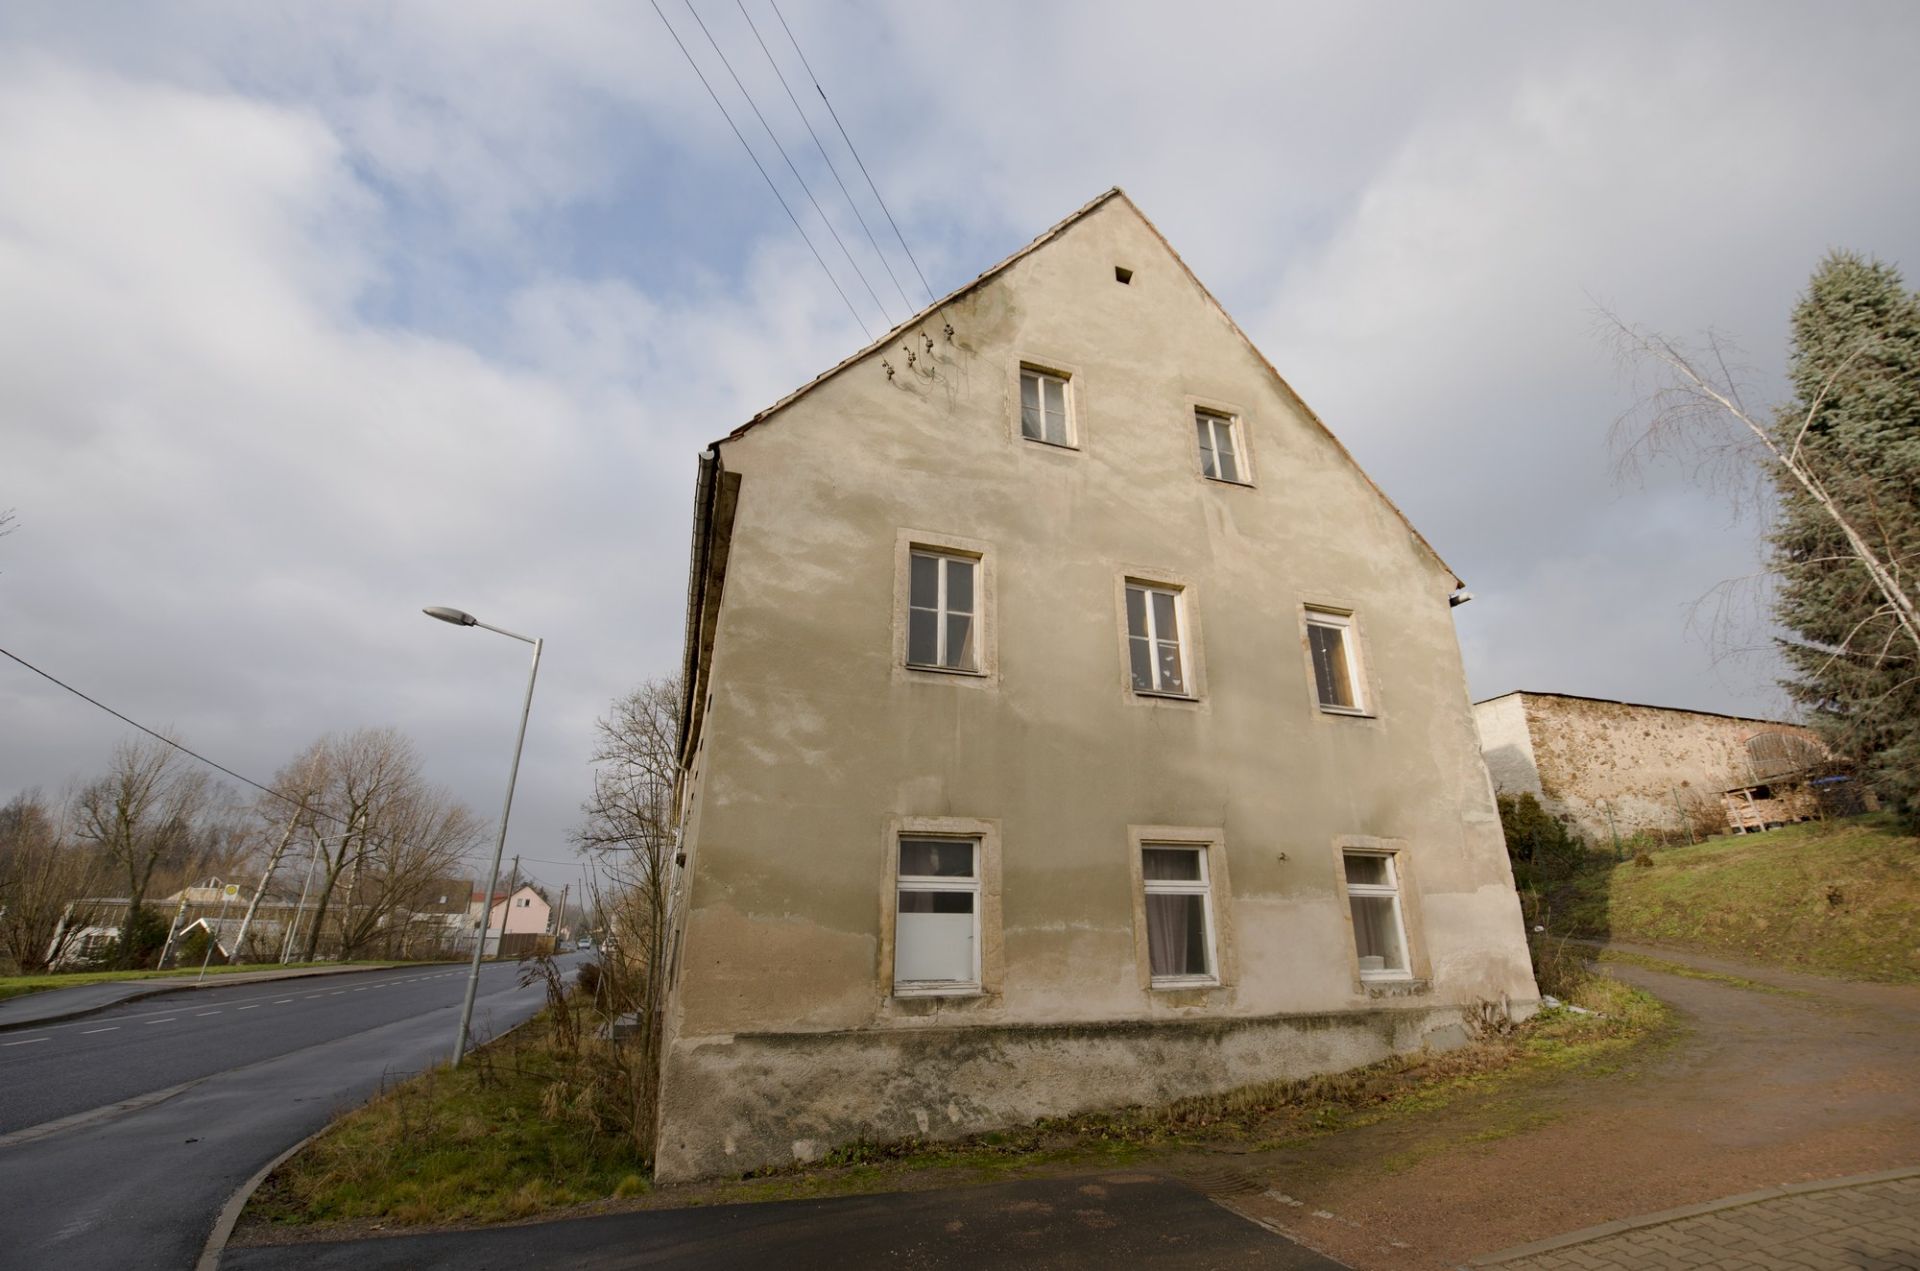 LARGE FORMER GUEST HOUSE IN NOSSEN, GERMANY - Image 3 of 47